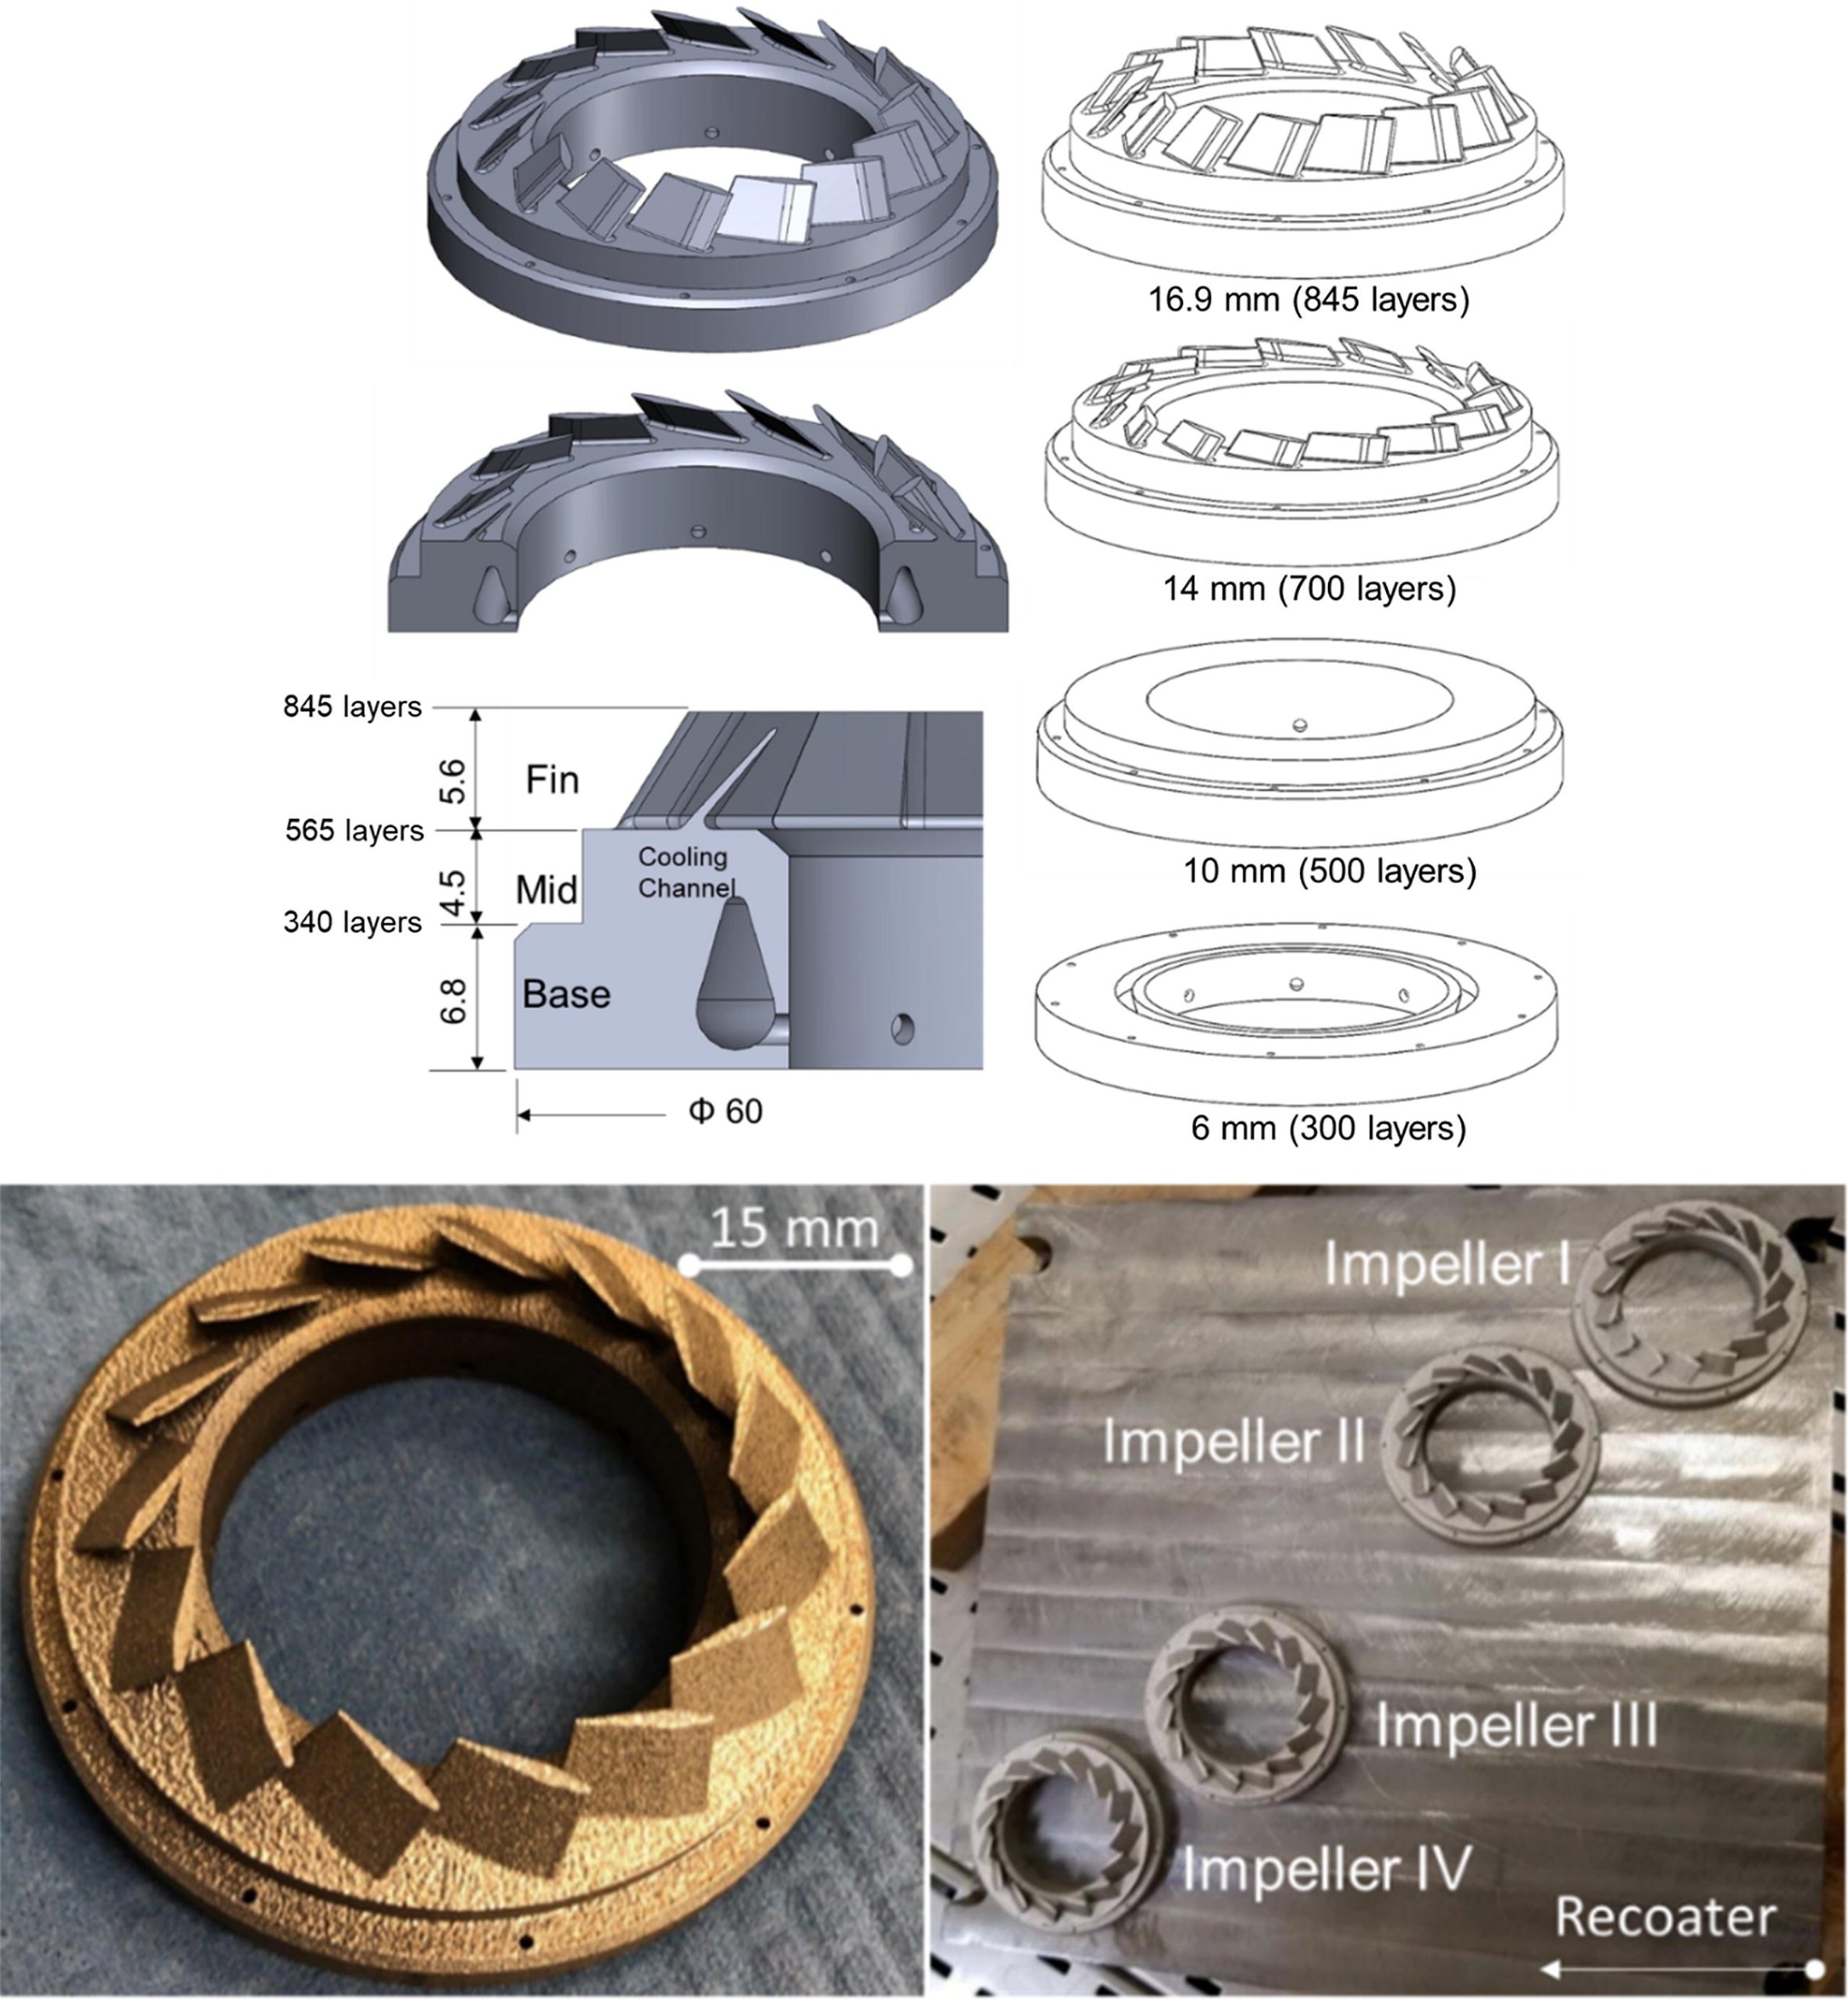 Cross section of an impeller showing the three build sections - base, mid, and fin - that the researchers used to test their digital twin. Image via Materials & Design.